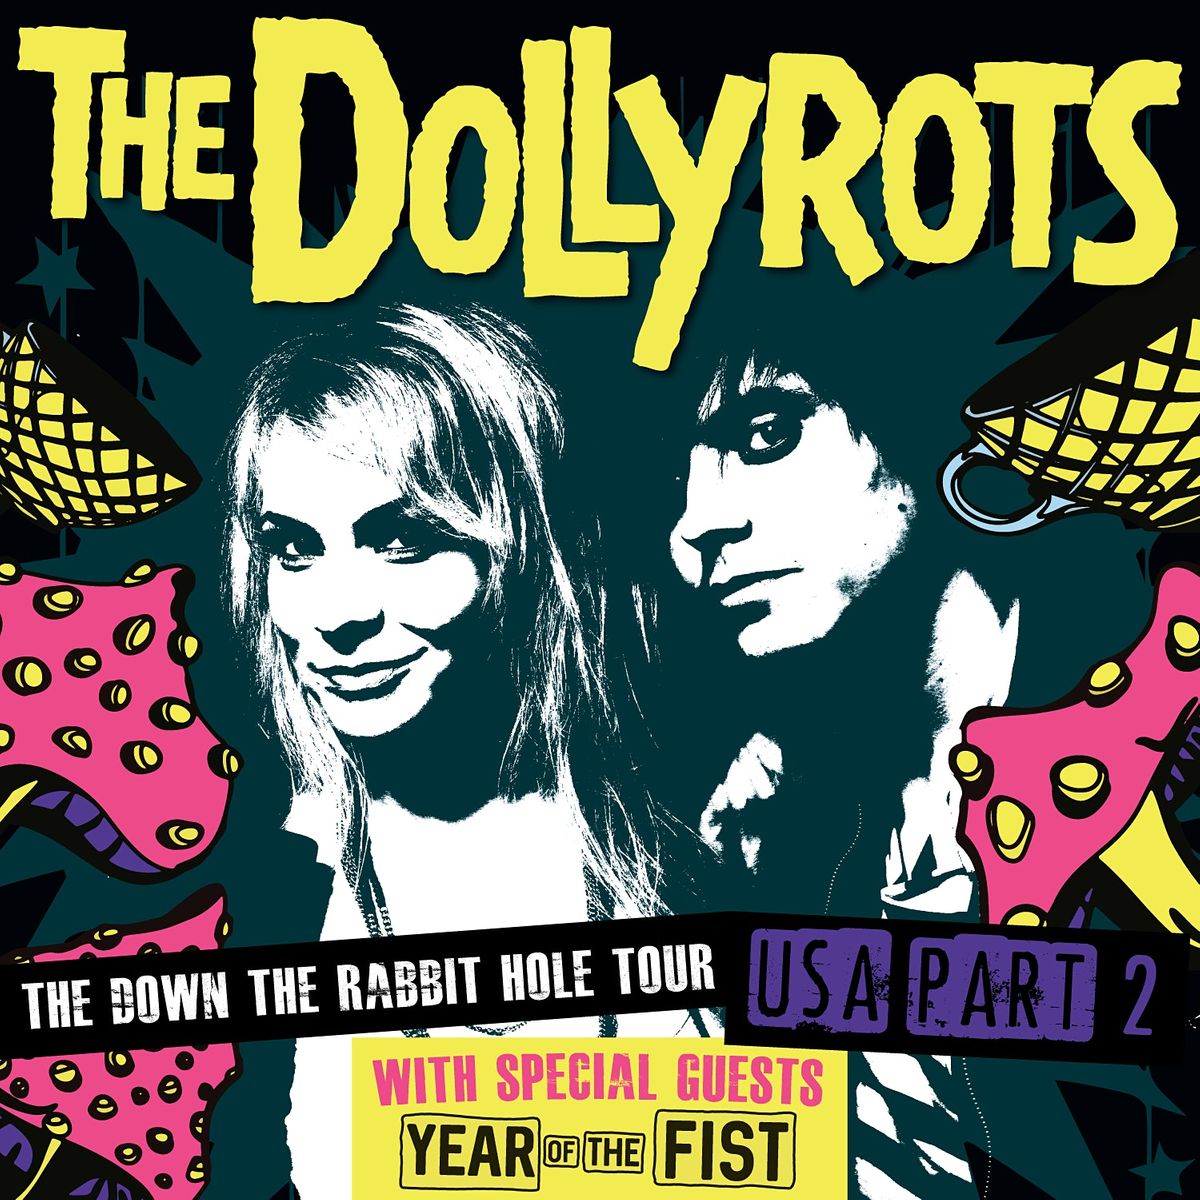 The Dollyrots w\/Year of the Fist + Guests at Kensington Club